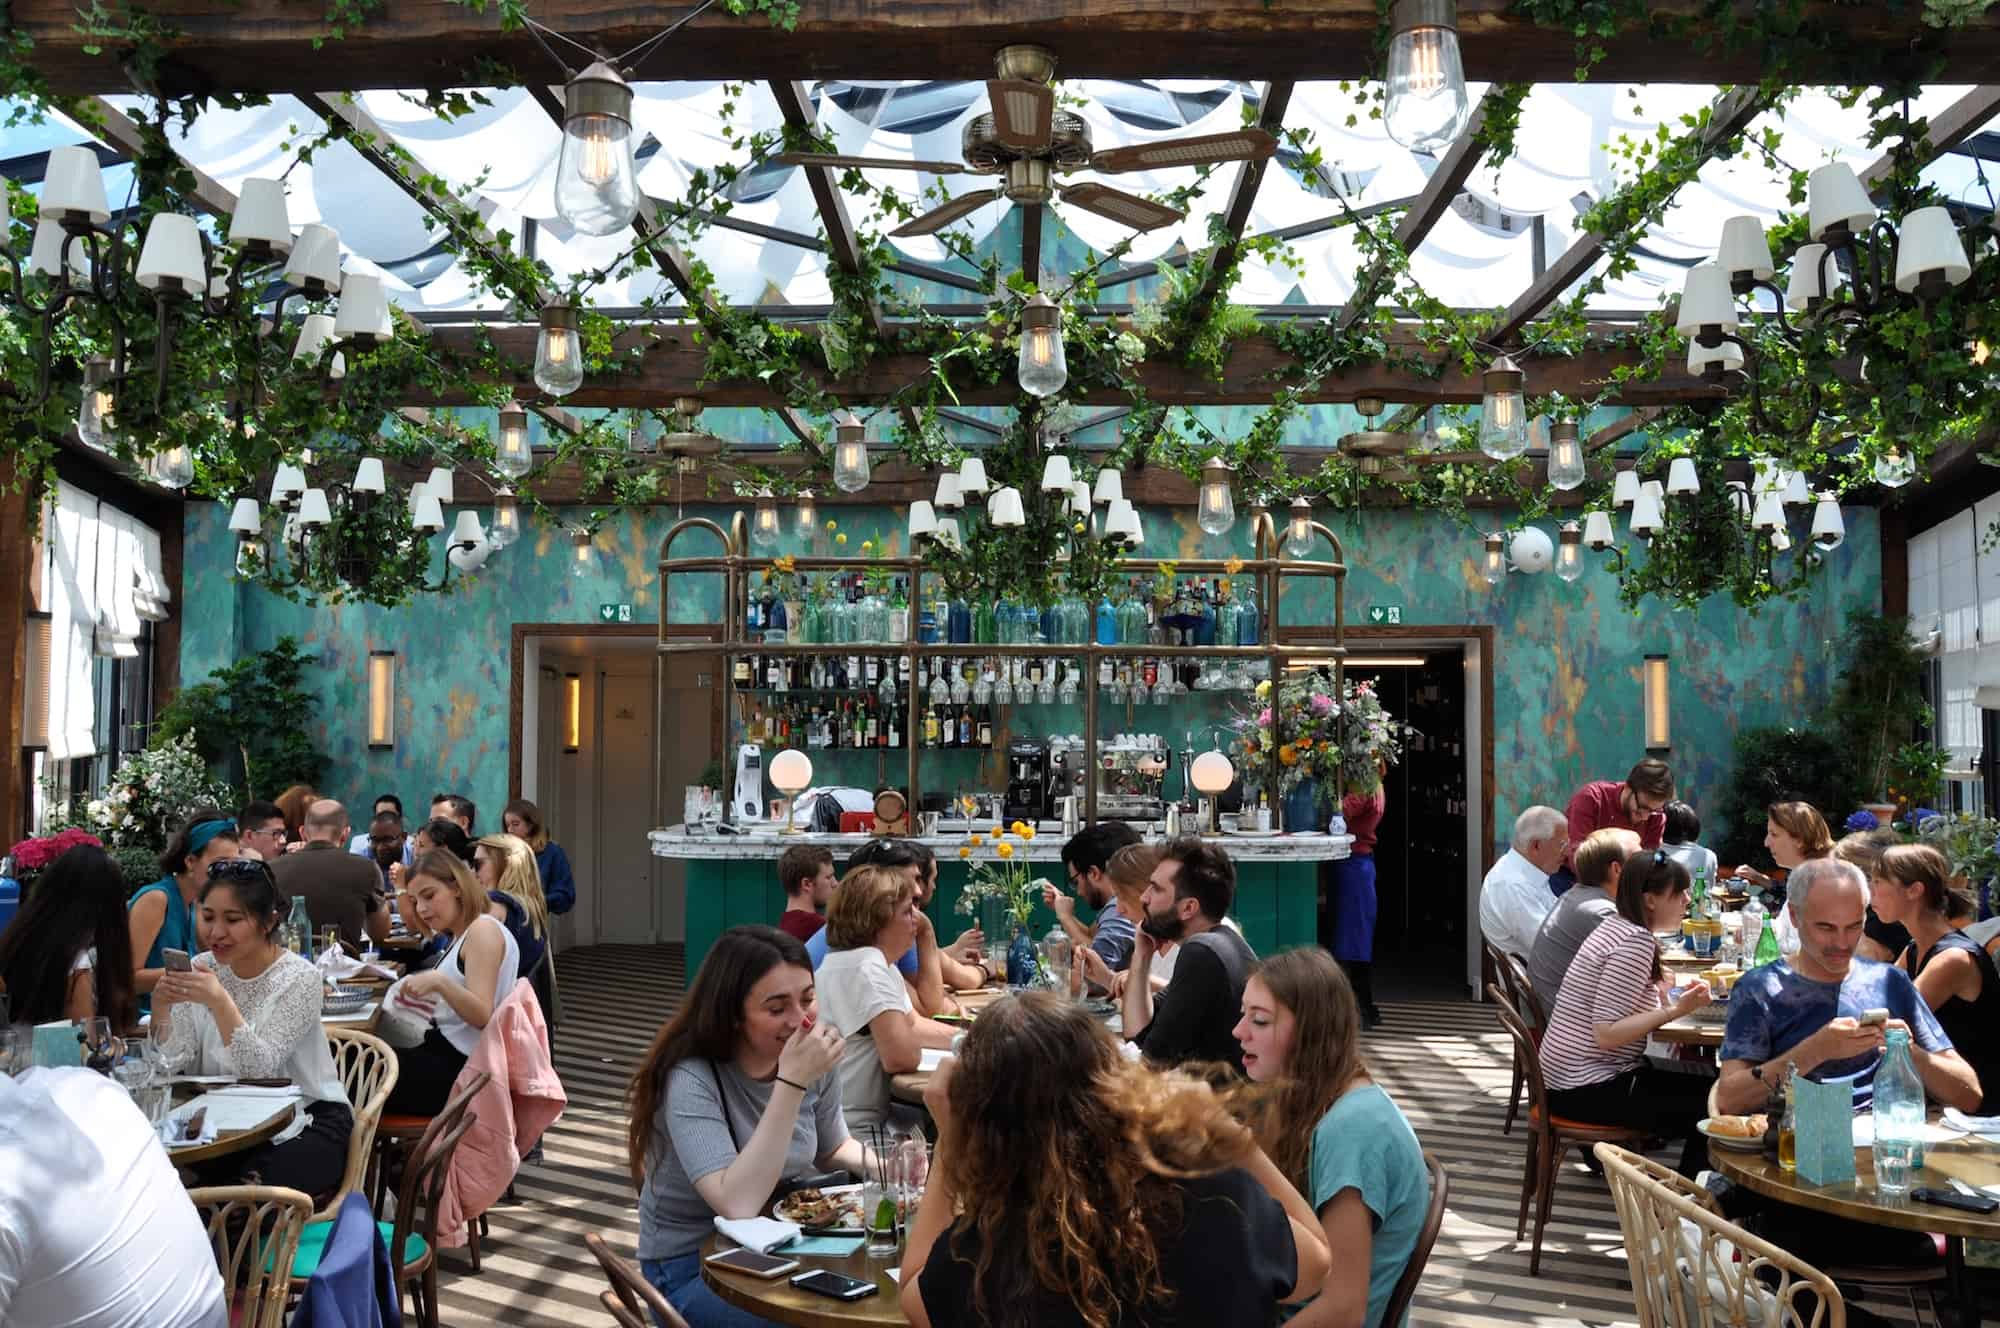 The Big Mamma Group offers Trendy, Fresh, Authentic Italian Dining in Paris at several locations including Pink Mamma in South Pigalle, where there are tables under a glass roof adorned with plants.